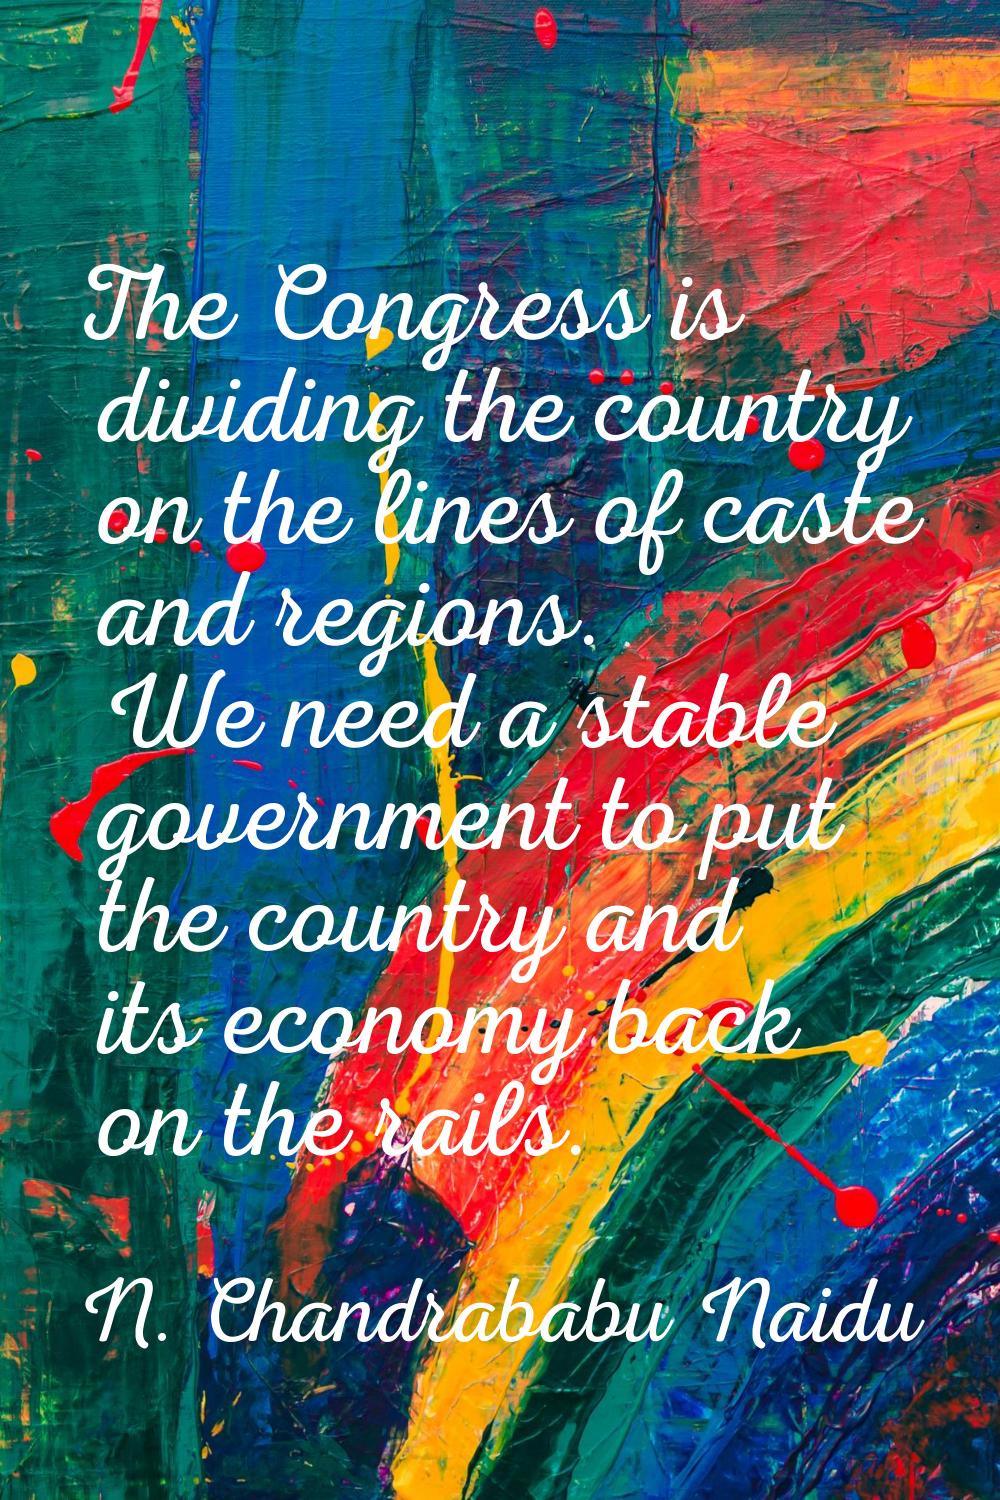 The Congress is dividing the country on the lines of caste and regions. We need a stable government